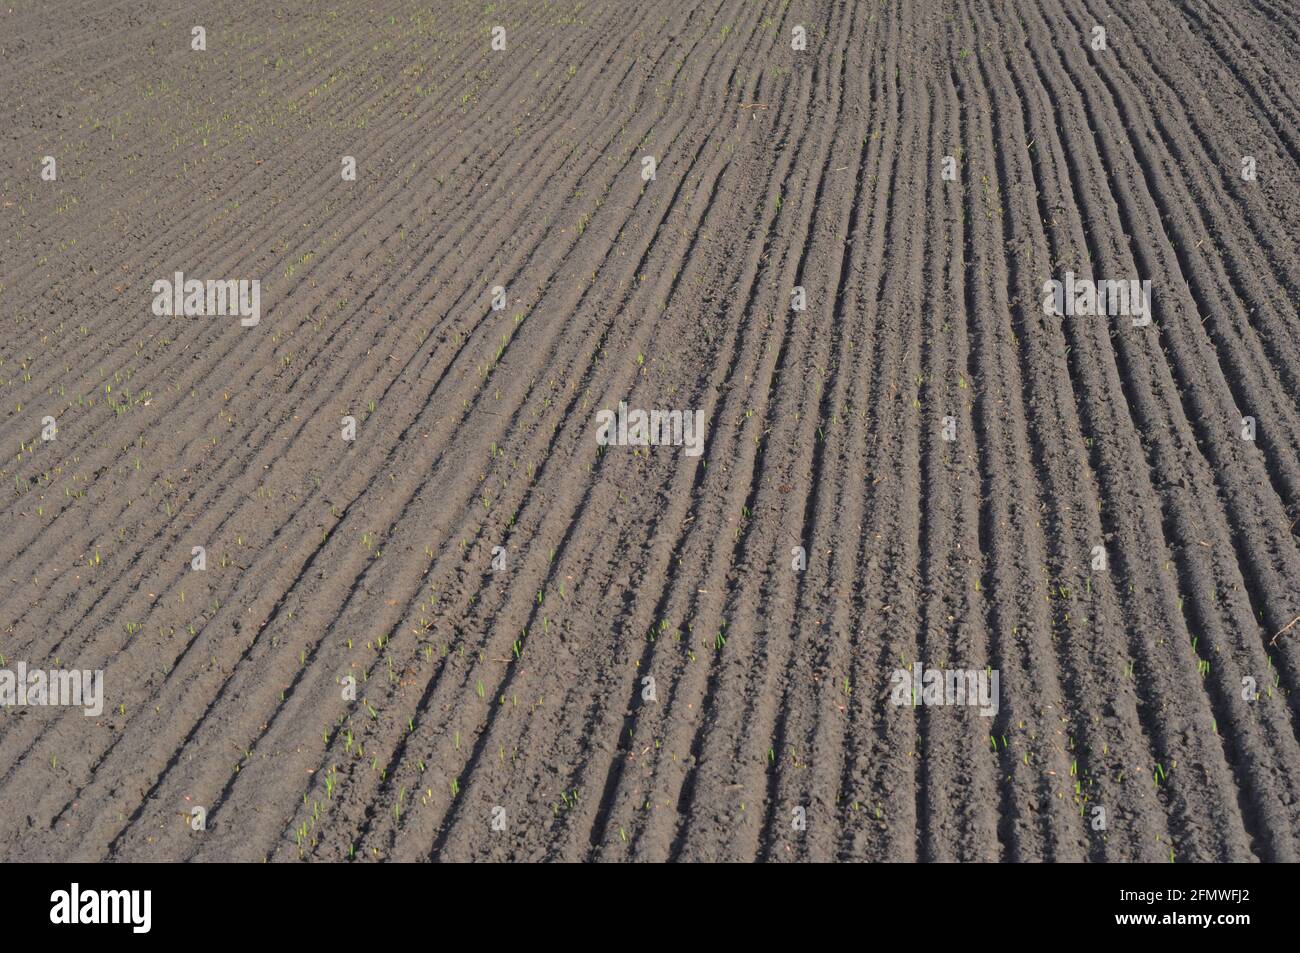 Agriculture: tilled, plowed and sowed black soil background. Seed sowing by placing seeds in furrows using drilling method. Stock Photo